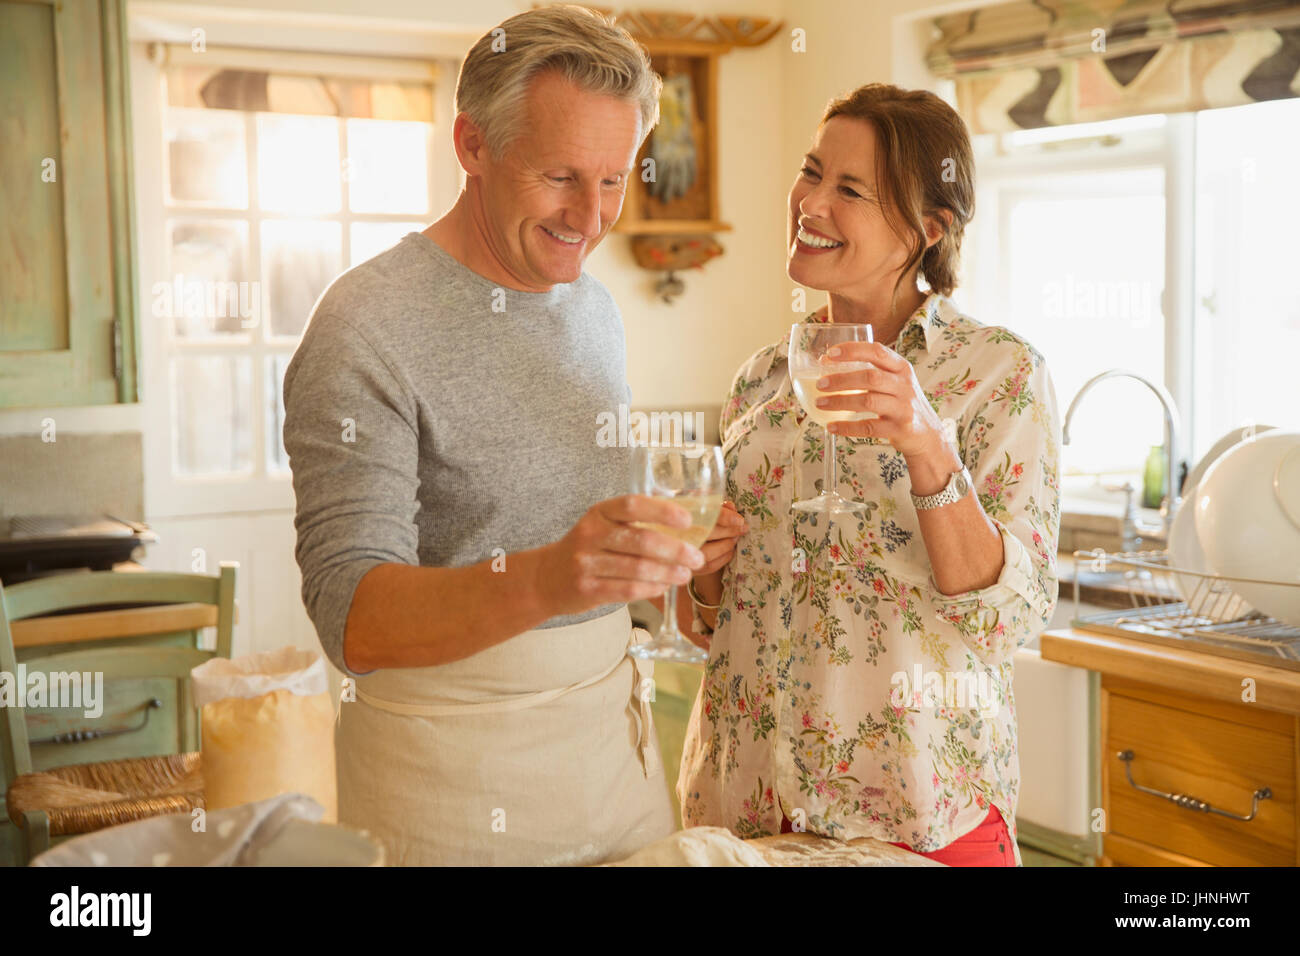 Smiling mature couple drinking wine and cooking in kitchen Stock Photo